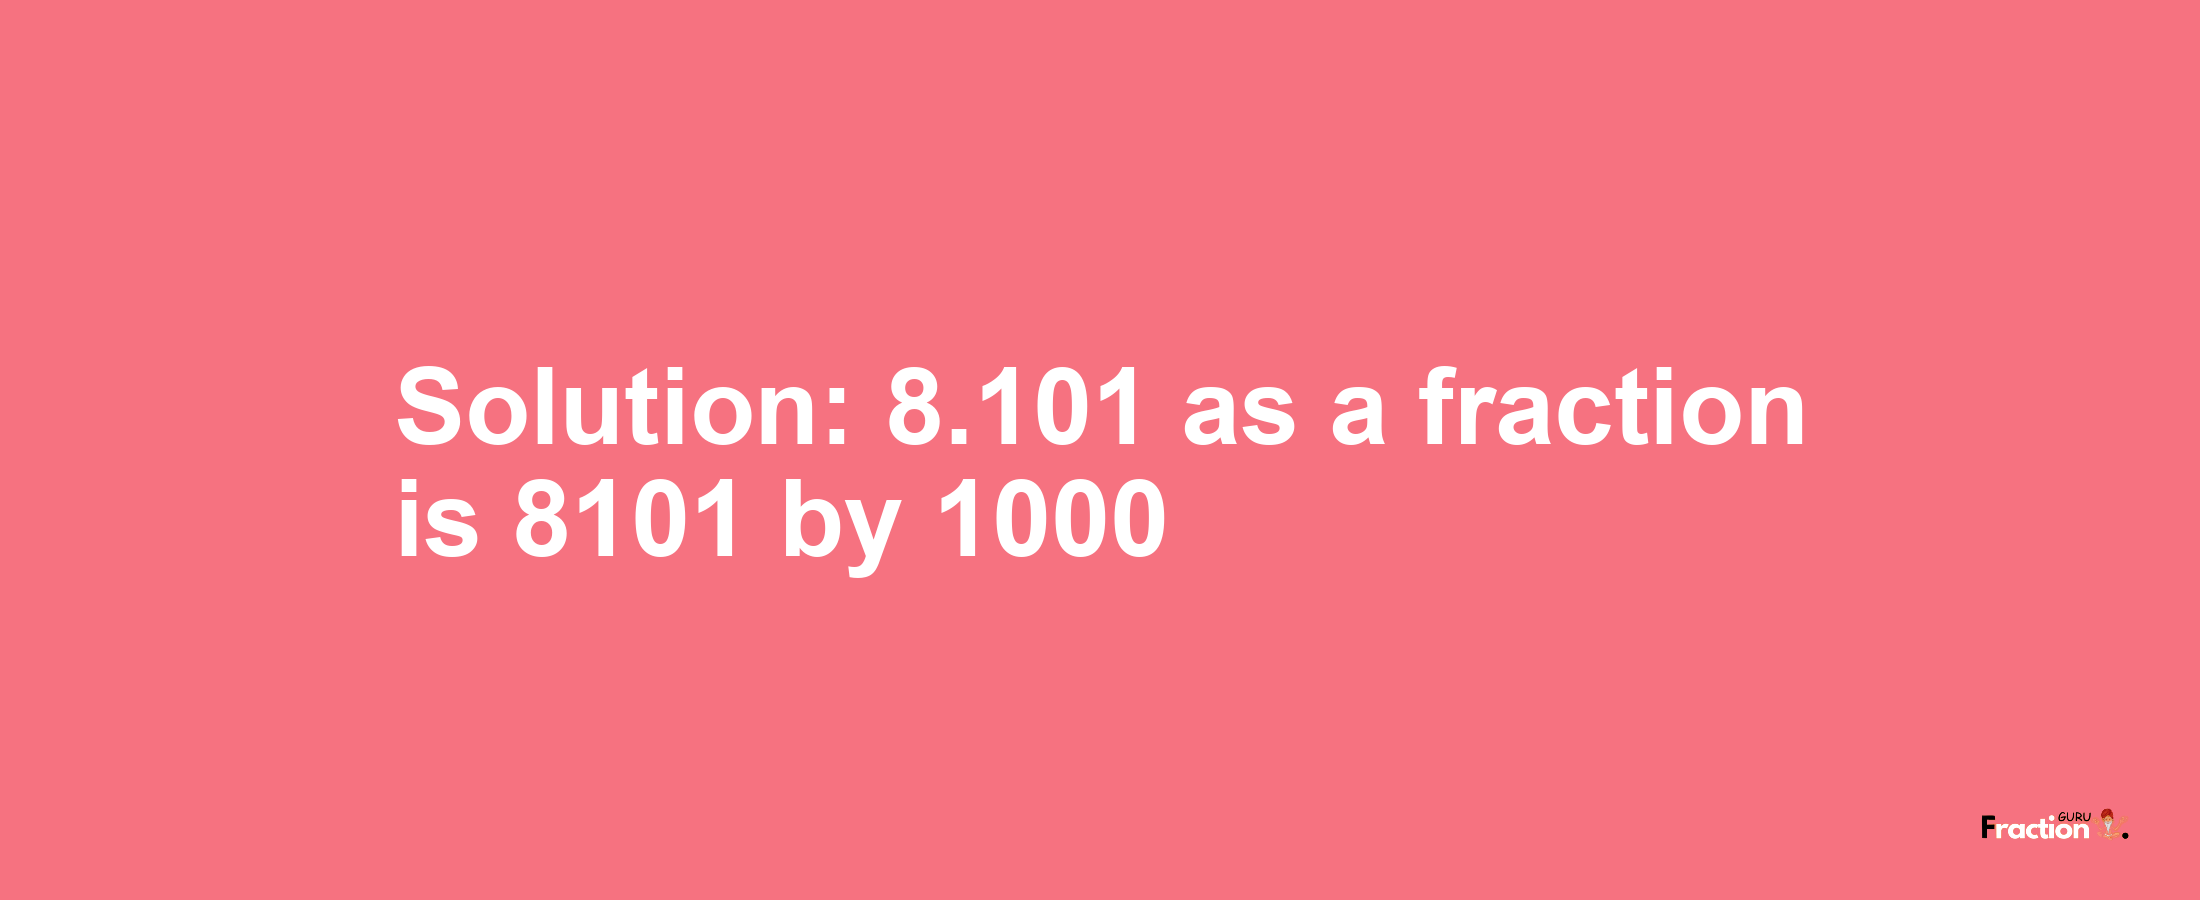 Solution:8.101 as a fraction is 8101/1000